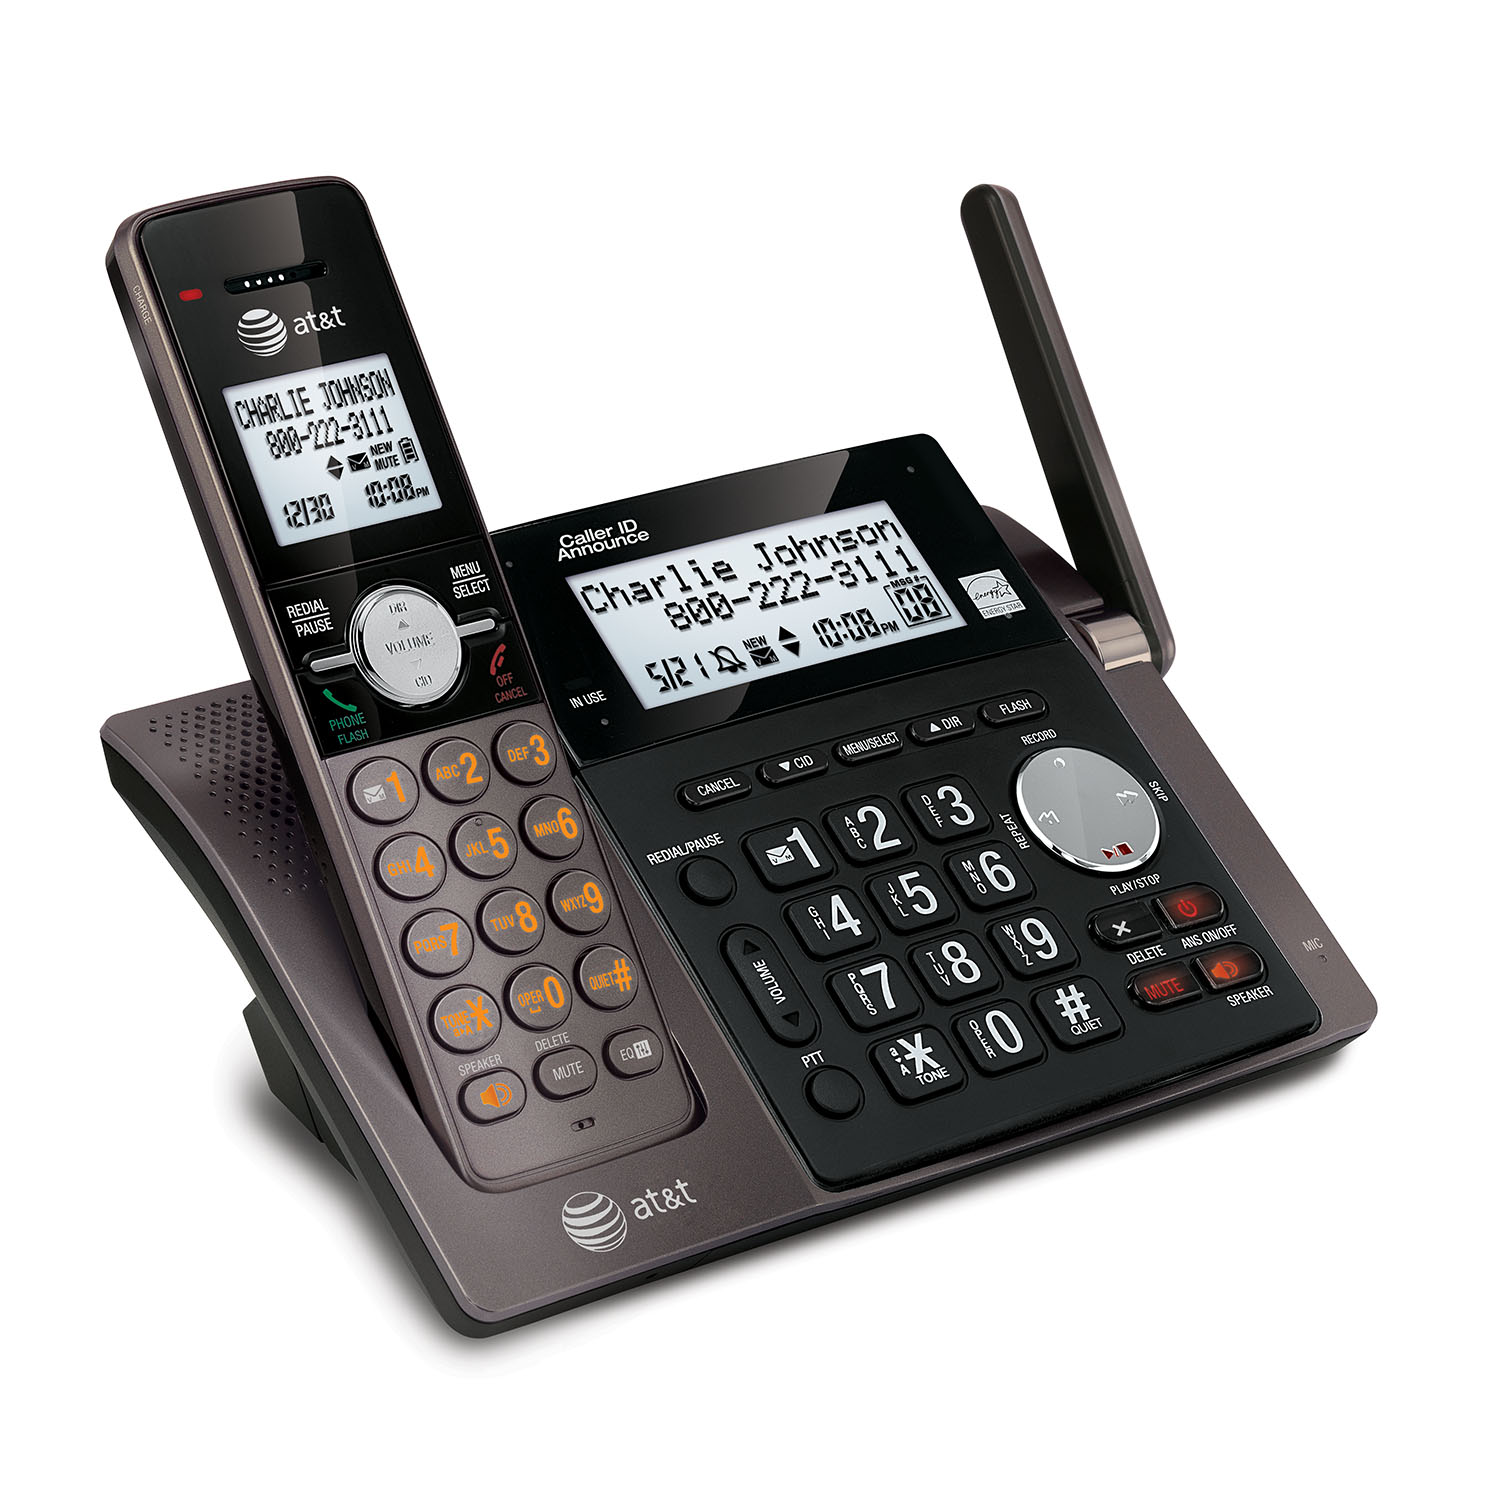 Cordless answering system with caller ID/call waiting - view 3